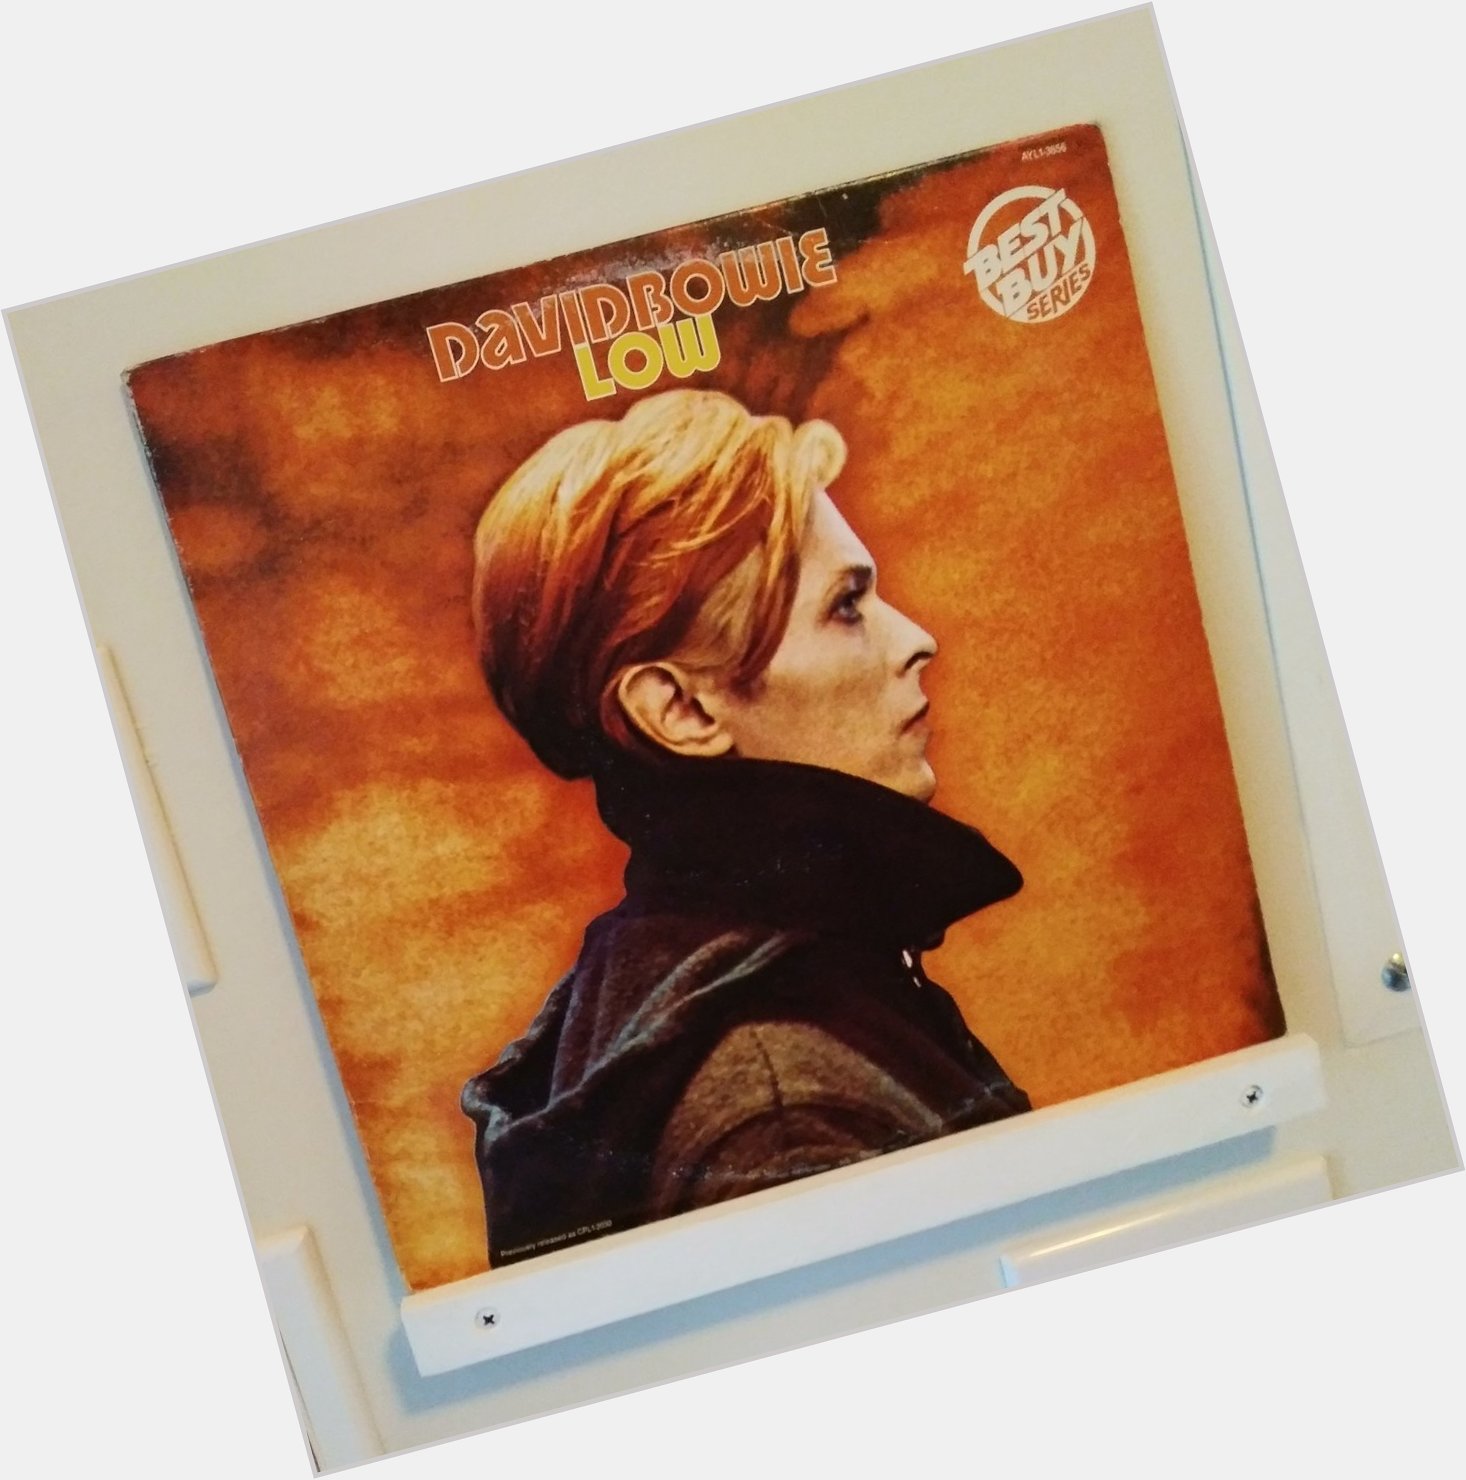  David Bowie - \"Low\"
Released 42 years ago today. Happy birthday to the alien. 